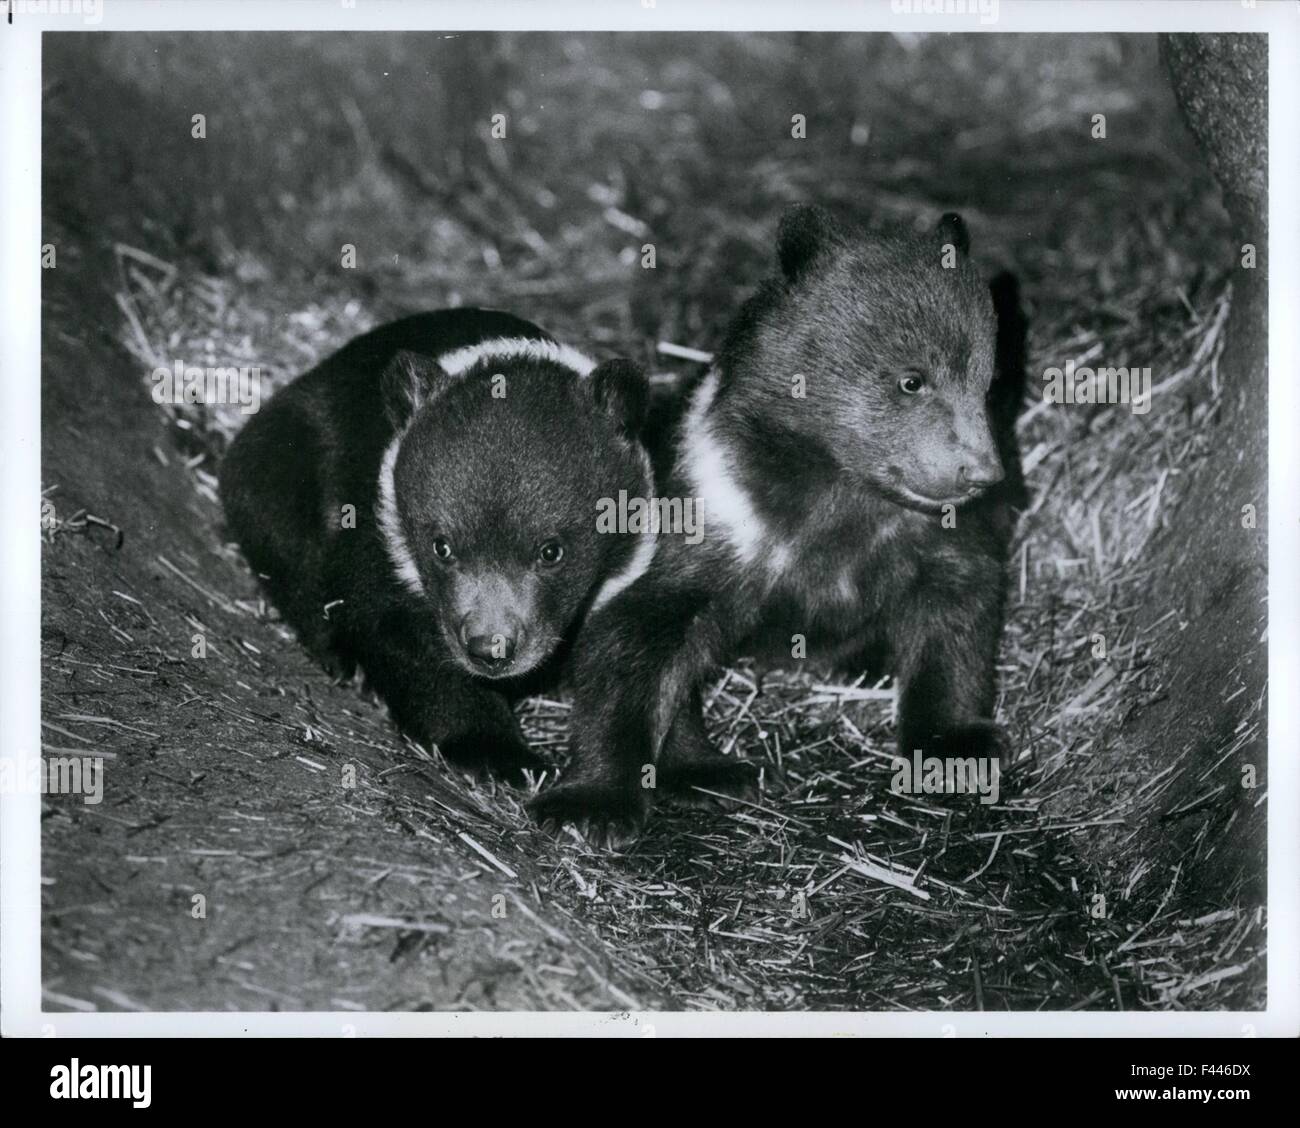 Jan. 10, 1974 - Bronx, N.Y. -- The Bronx Zoo's two Kodiak bear cubs explore the private den they share with their mother, Cleo. The cubs born Feb.2 are Cleo's first. They will lose their white collars as they mature, changing to the uniform brown of adult Kodiak bears. Kodiak bears, native to Alaska's Kodiak Island, are the largest living carnivores and may reach a length of nine feet. But a birth, the Cubs are tiny, hairless and helpless. Weighing as little as a pound, newborn Kodiak bears are blind and incapable of much coordinated movement. Zoo mammalogists are taking care not to disturb th Stock Photo